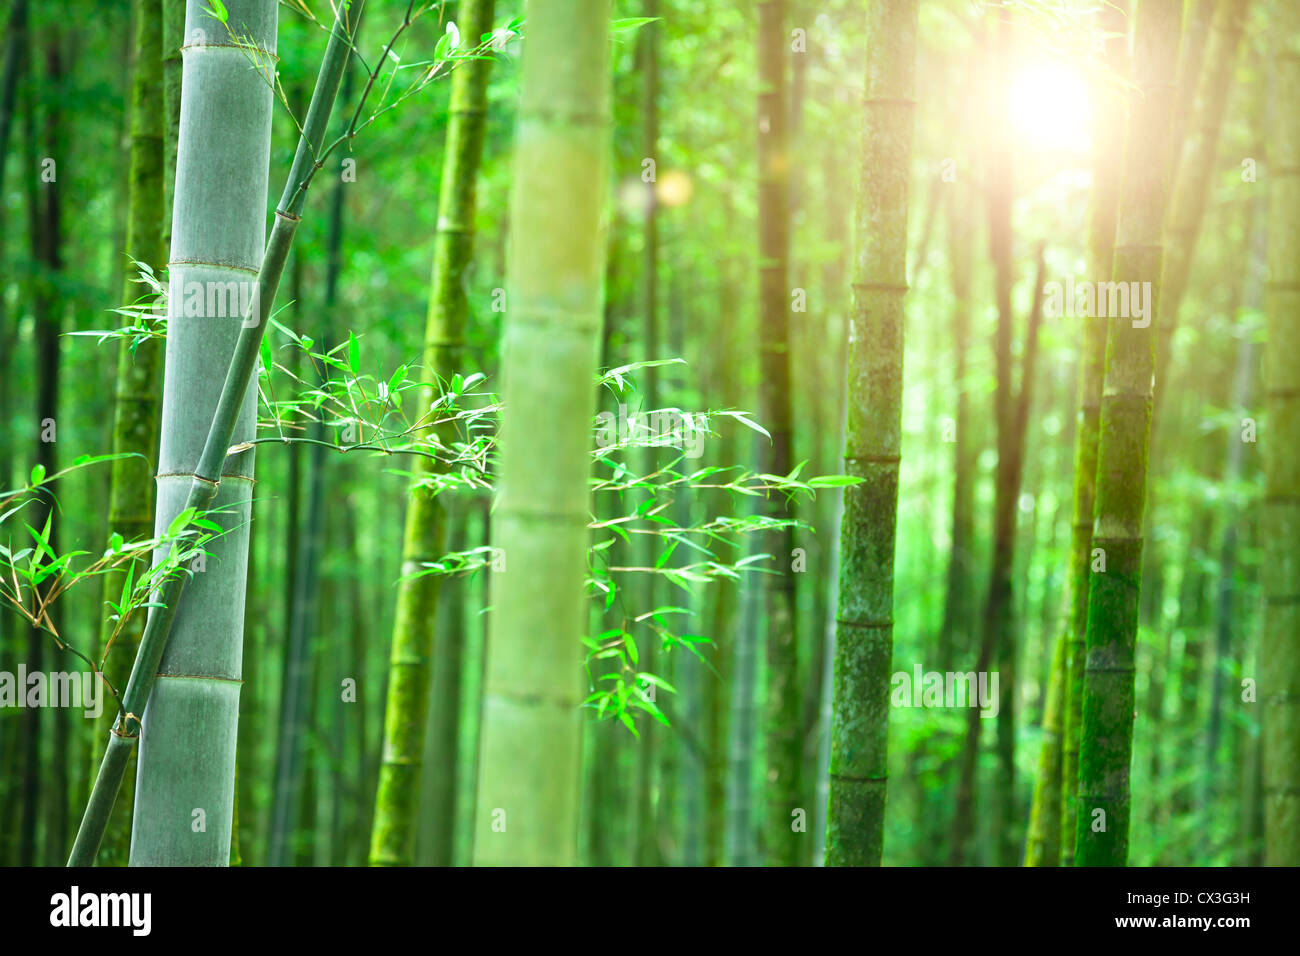 Bamboo forest with morning sunlight Stock Photo